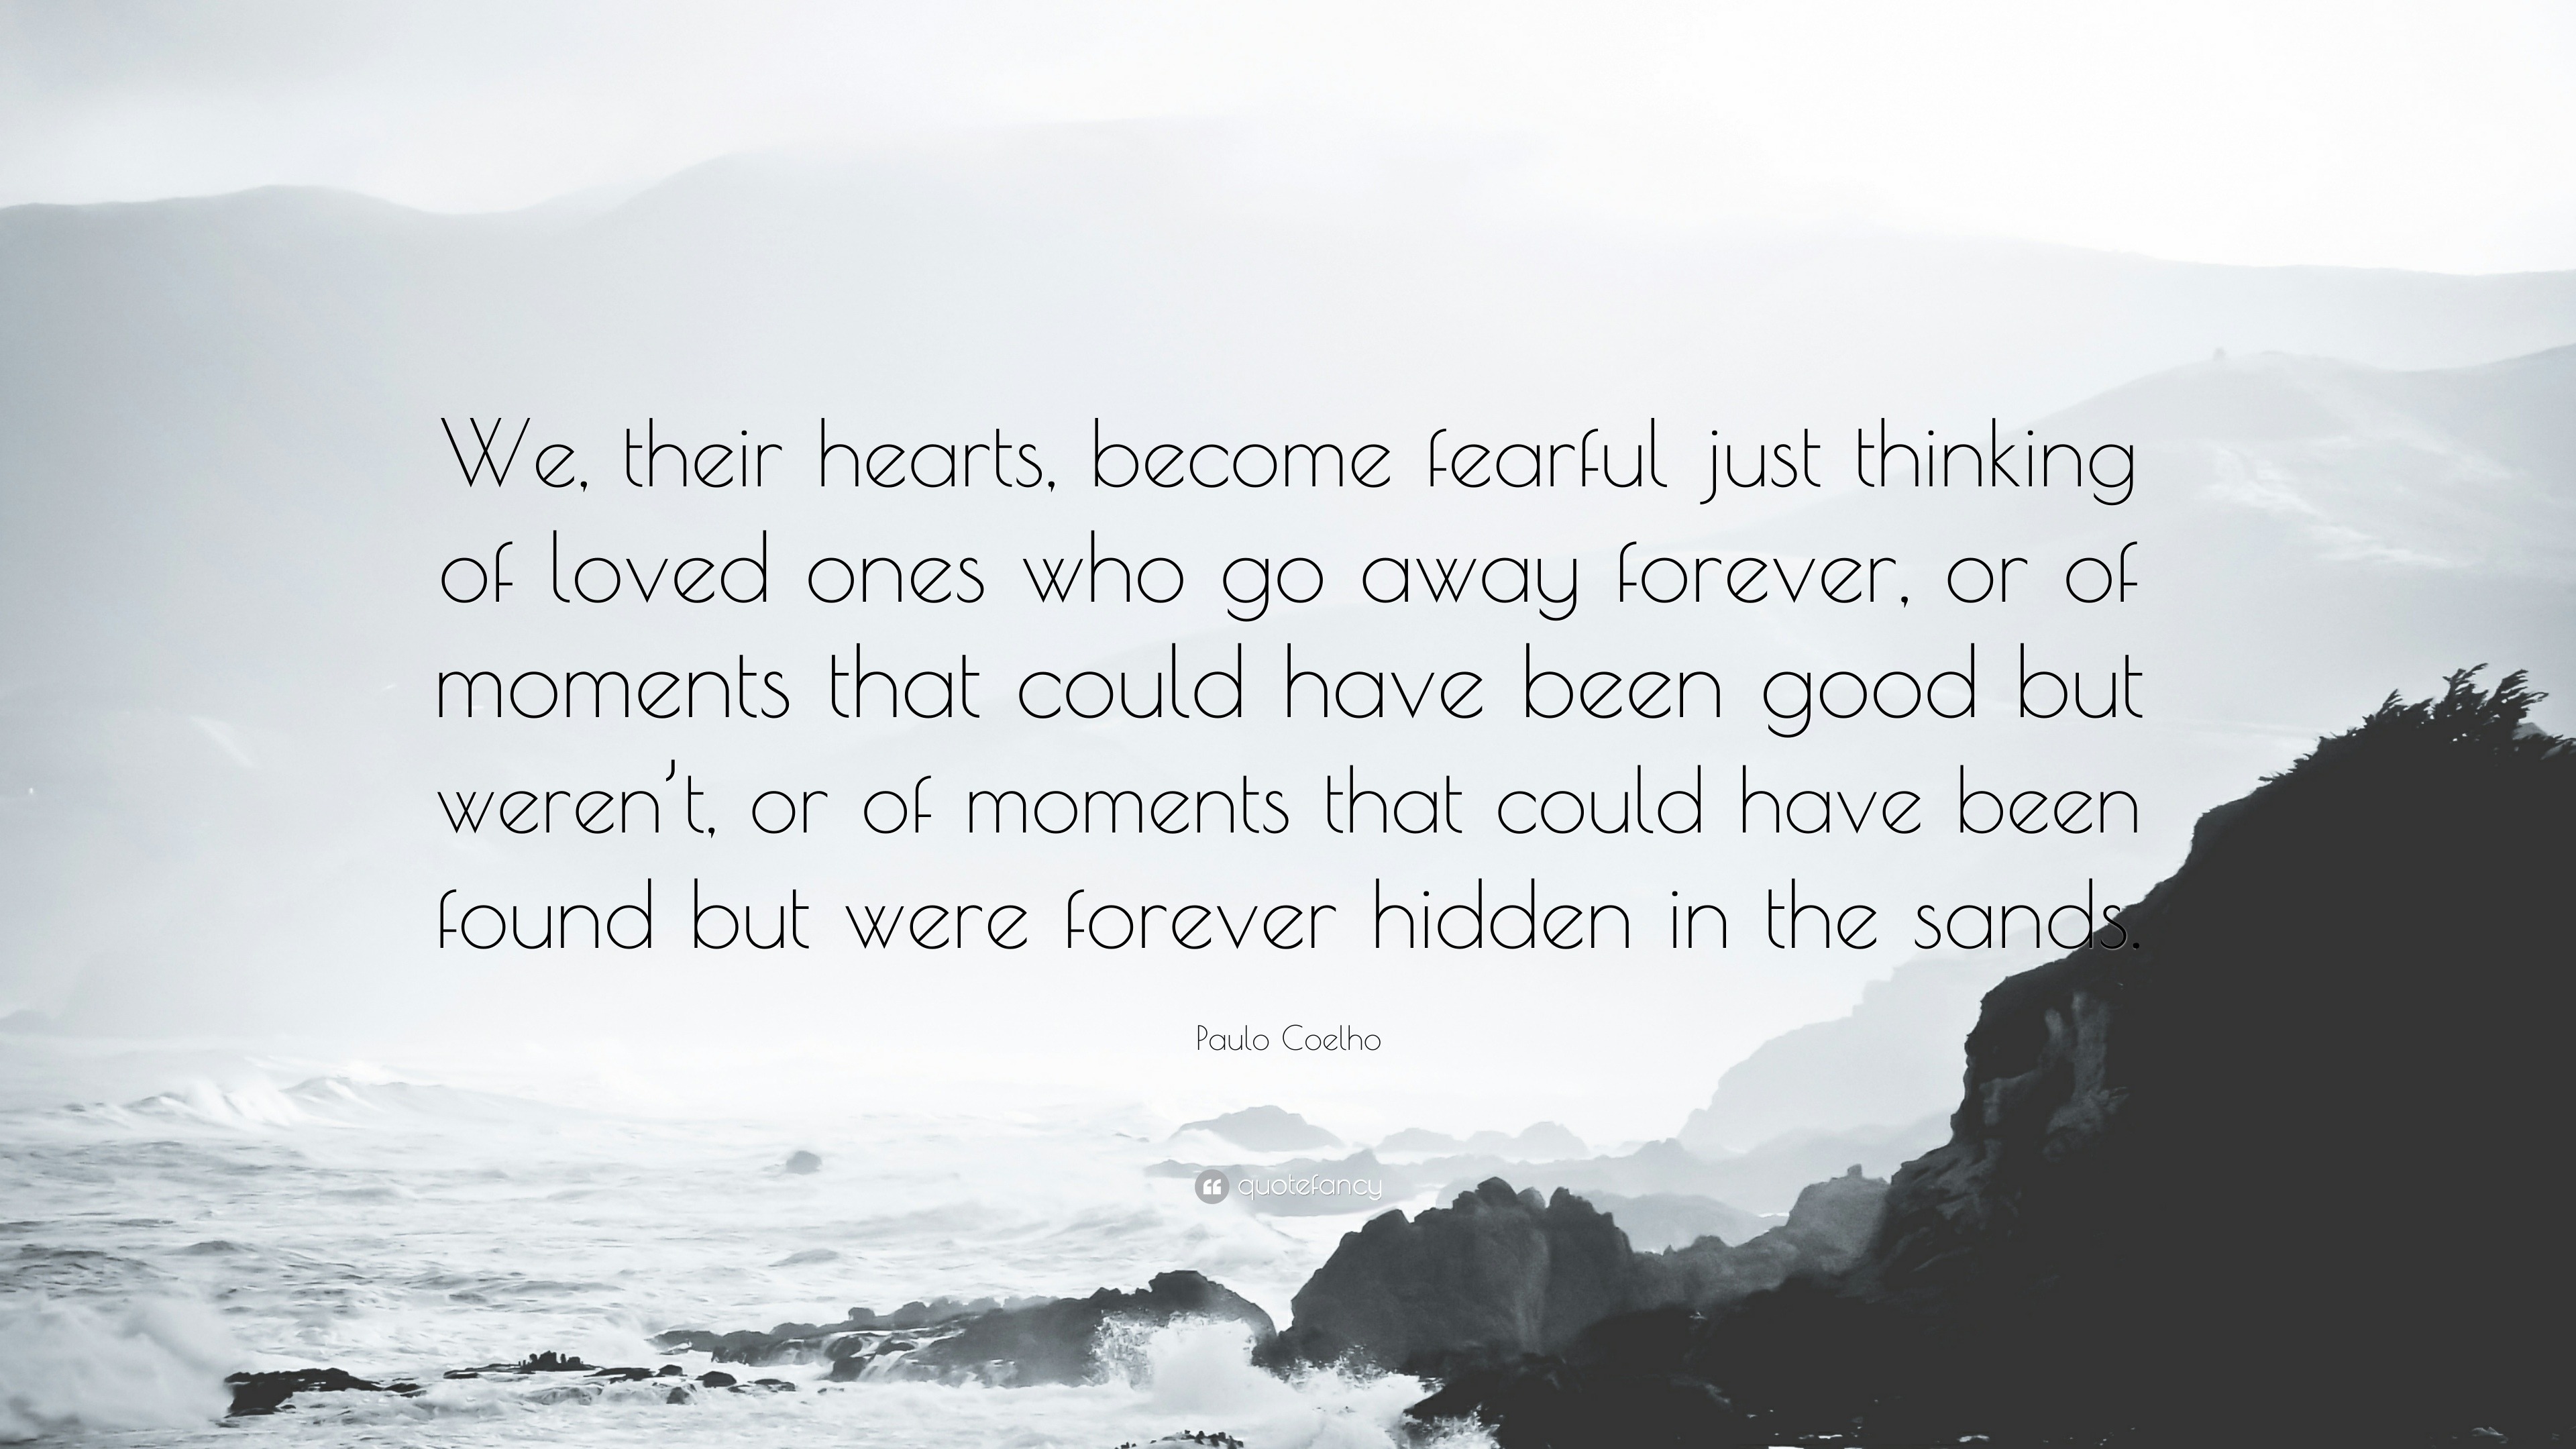 Paulo Coelho Quote “We their hearts be e fearful just thinking of loved